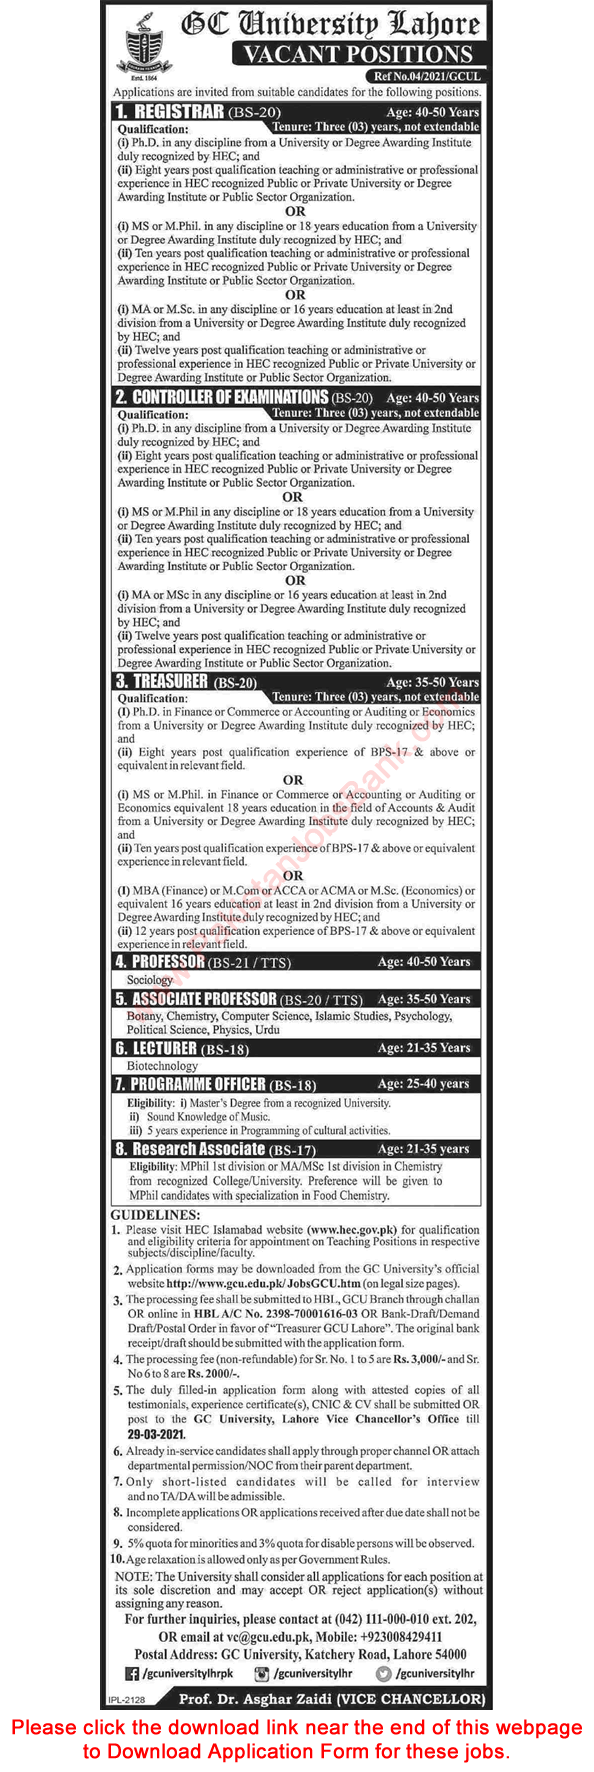 GC University Lahore Jobs March 2021 Application Form Teaching Faculty & Others Latest